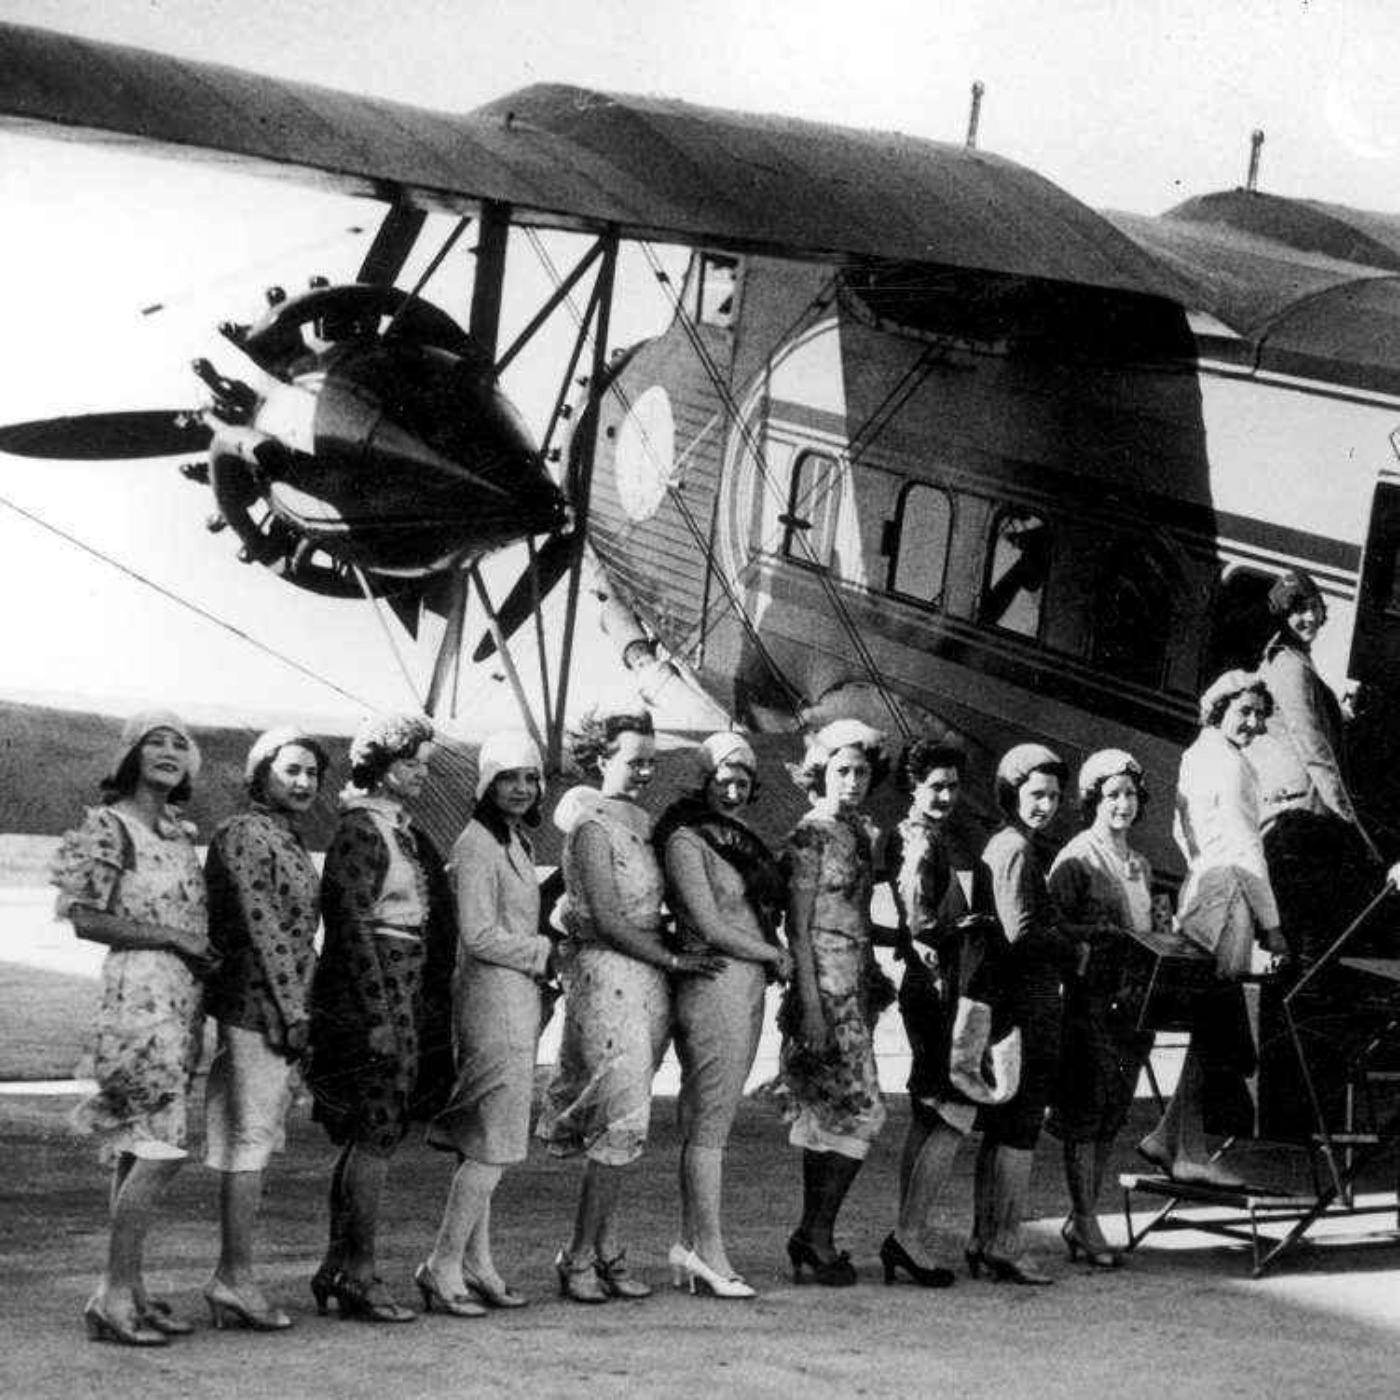 Launch of the Sky Girls